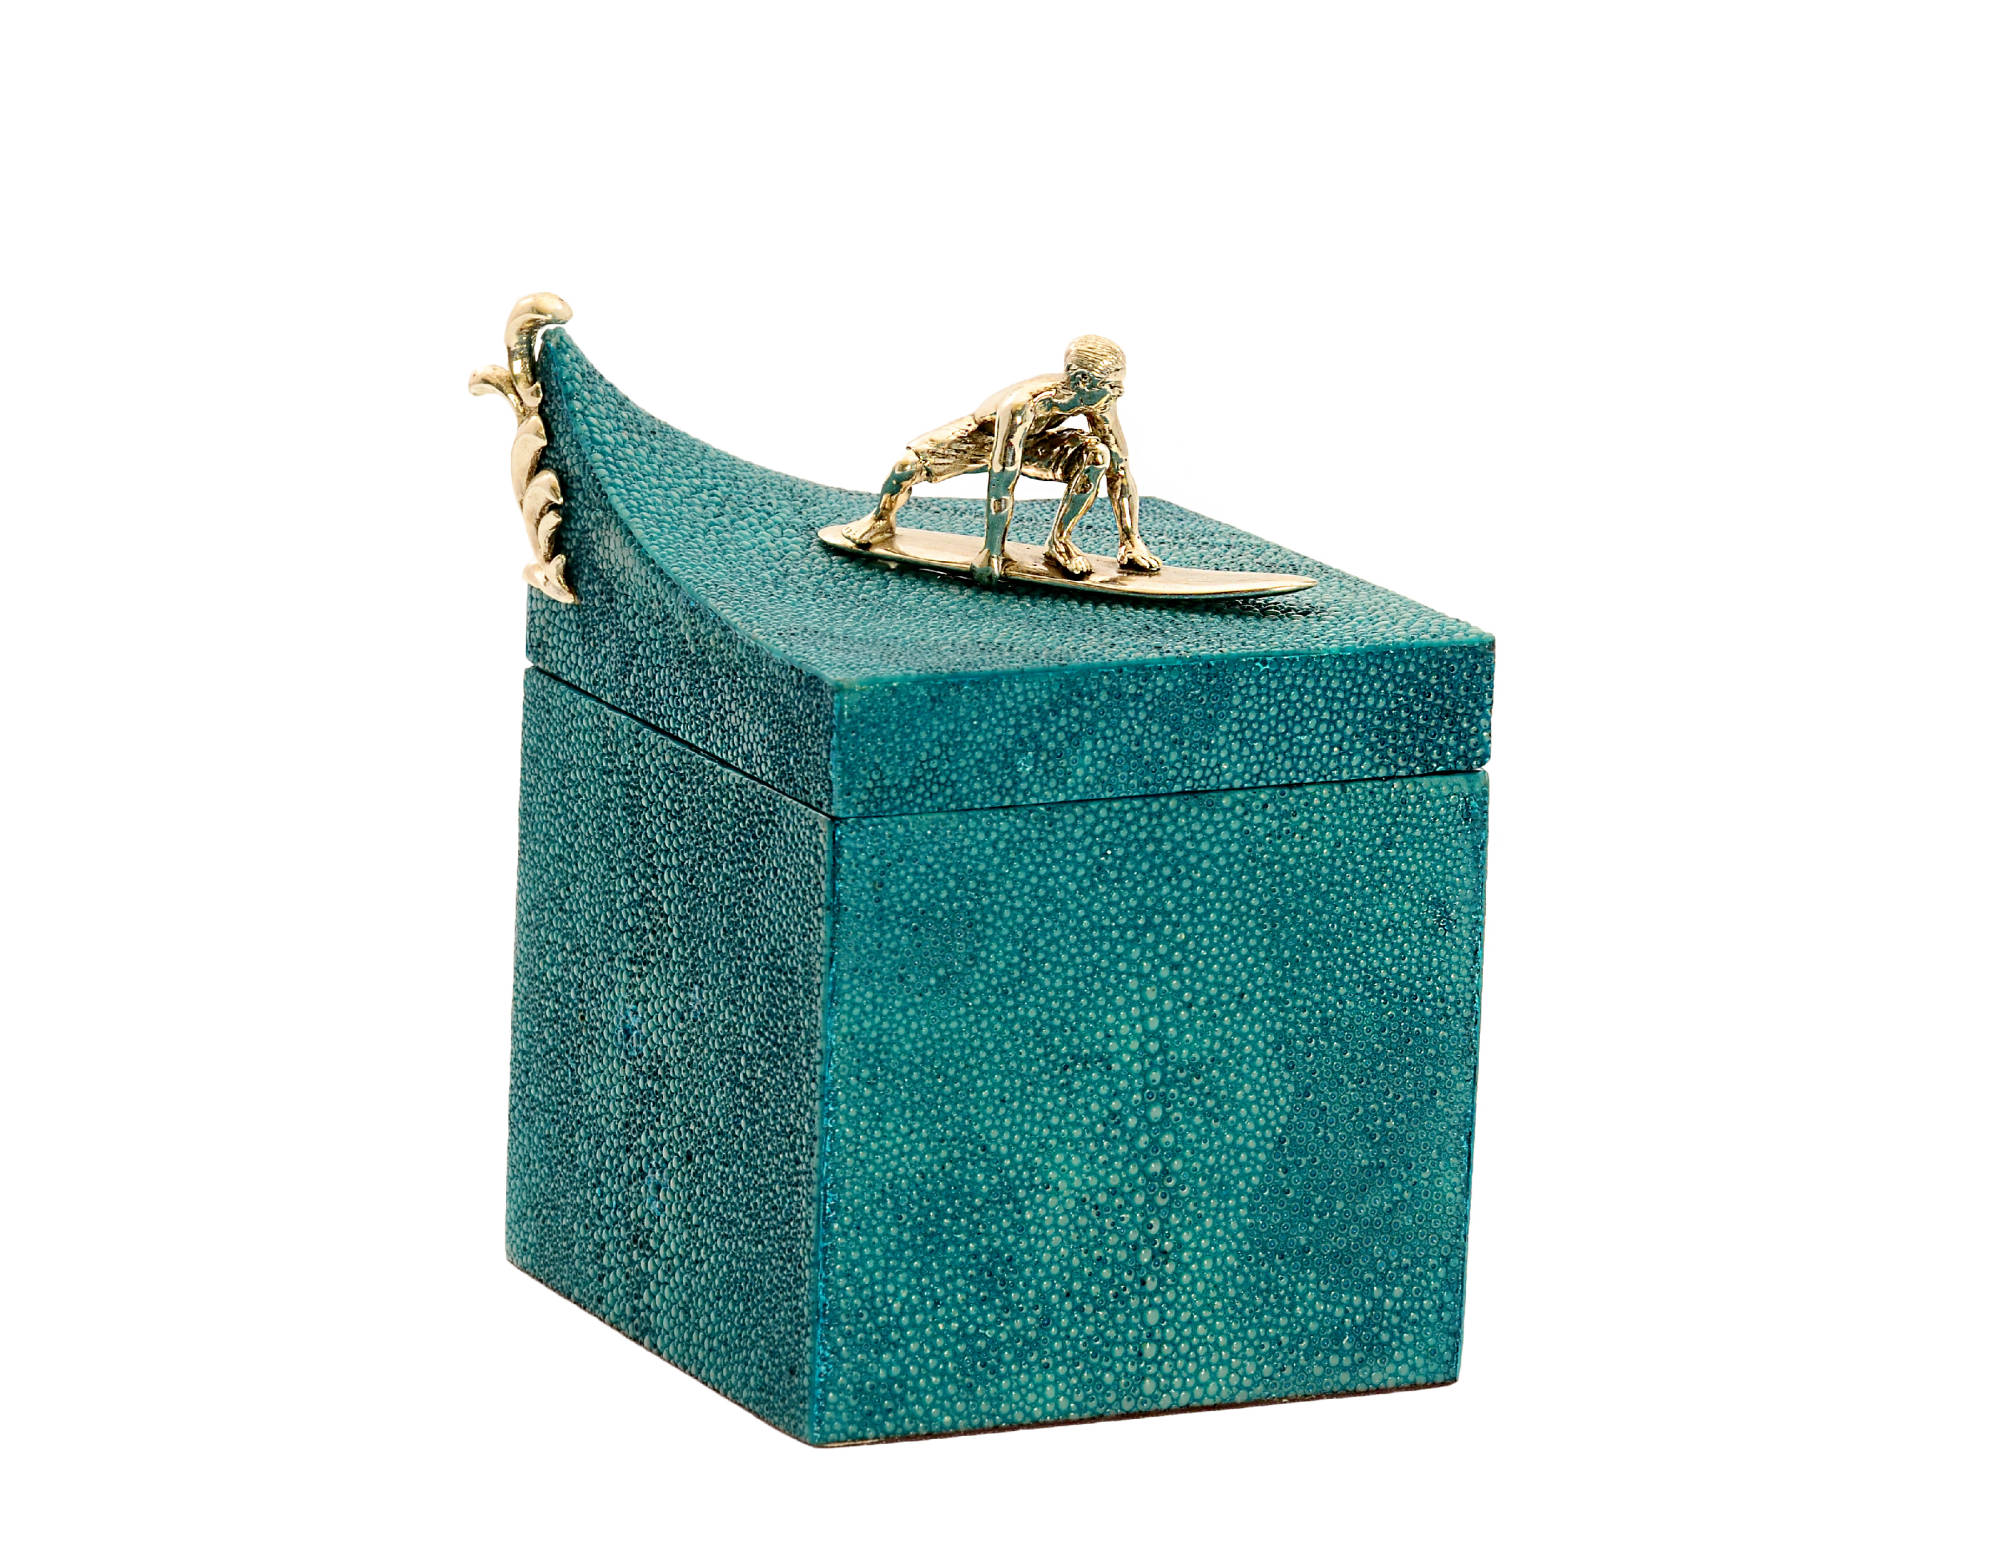 Dark blue surfing box in shagreen inlay with silver plated surfing man accent